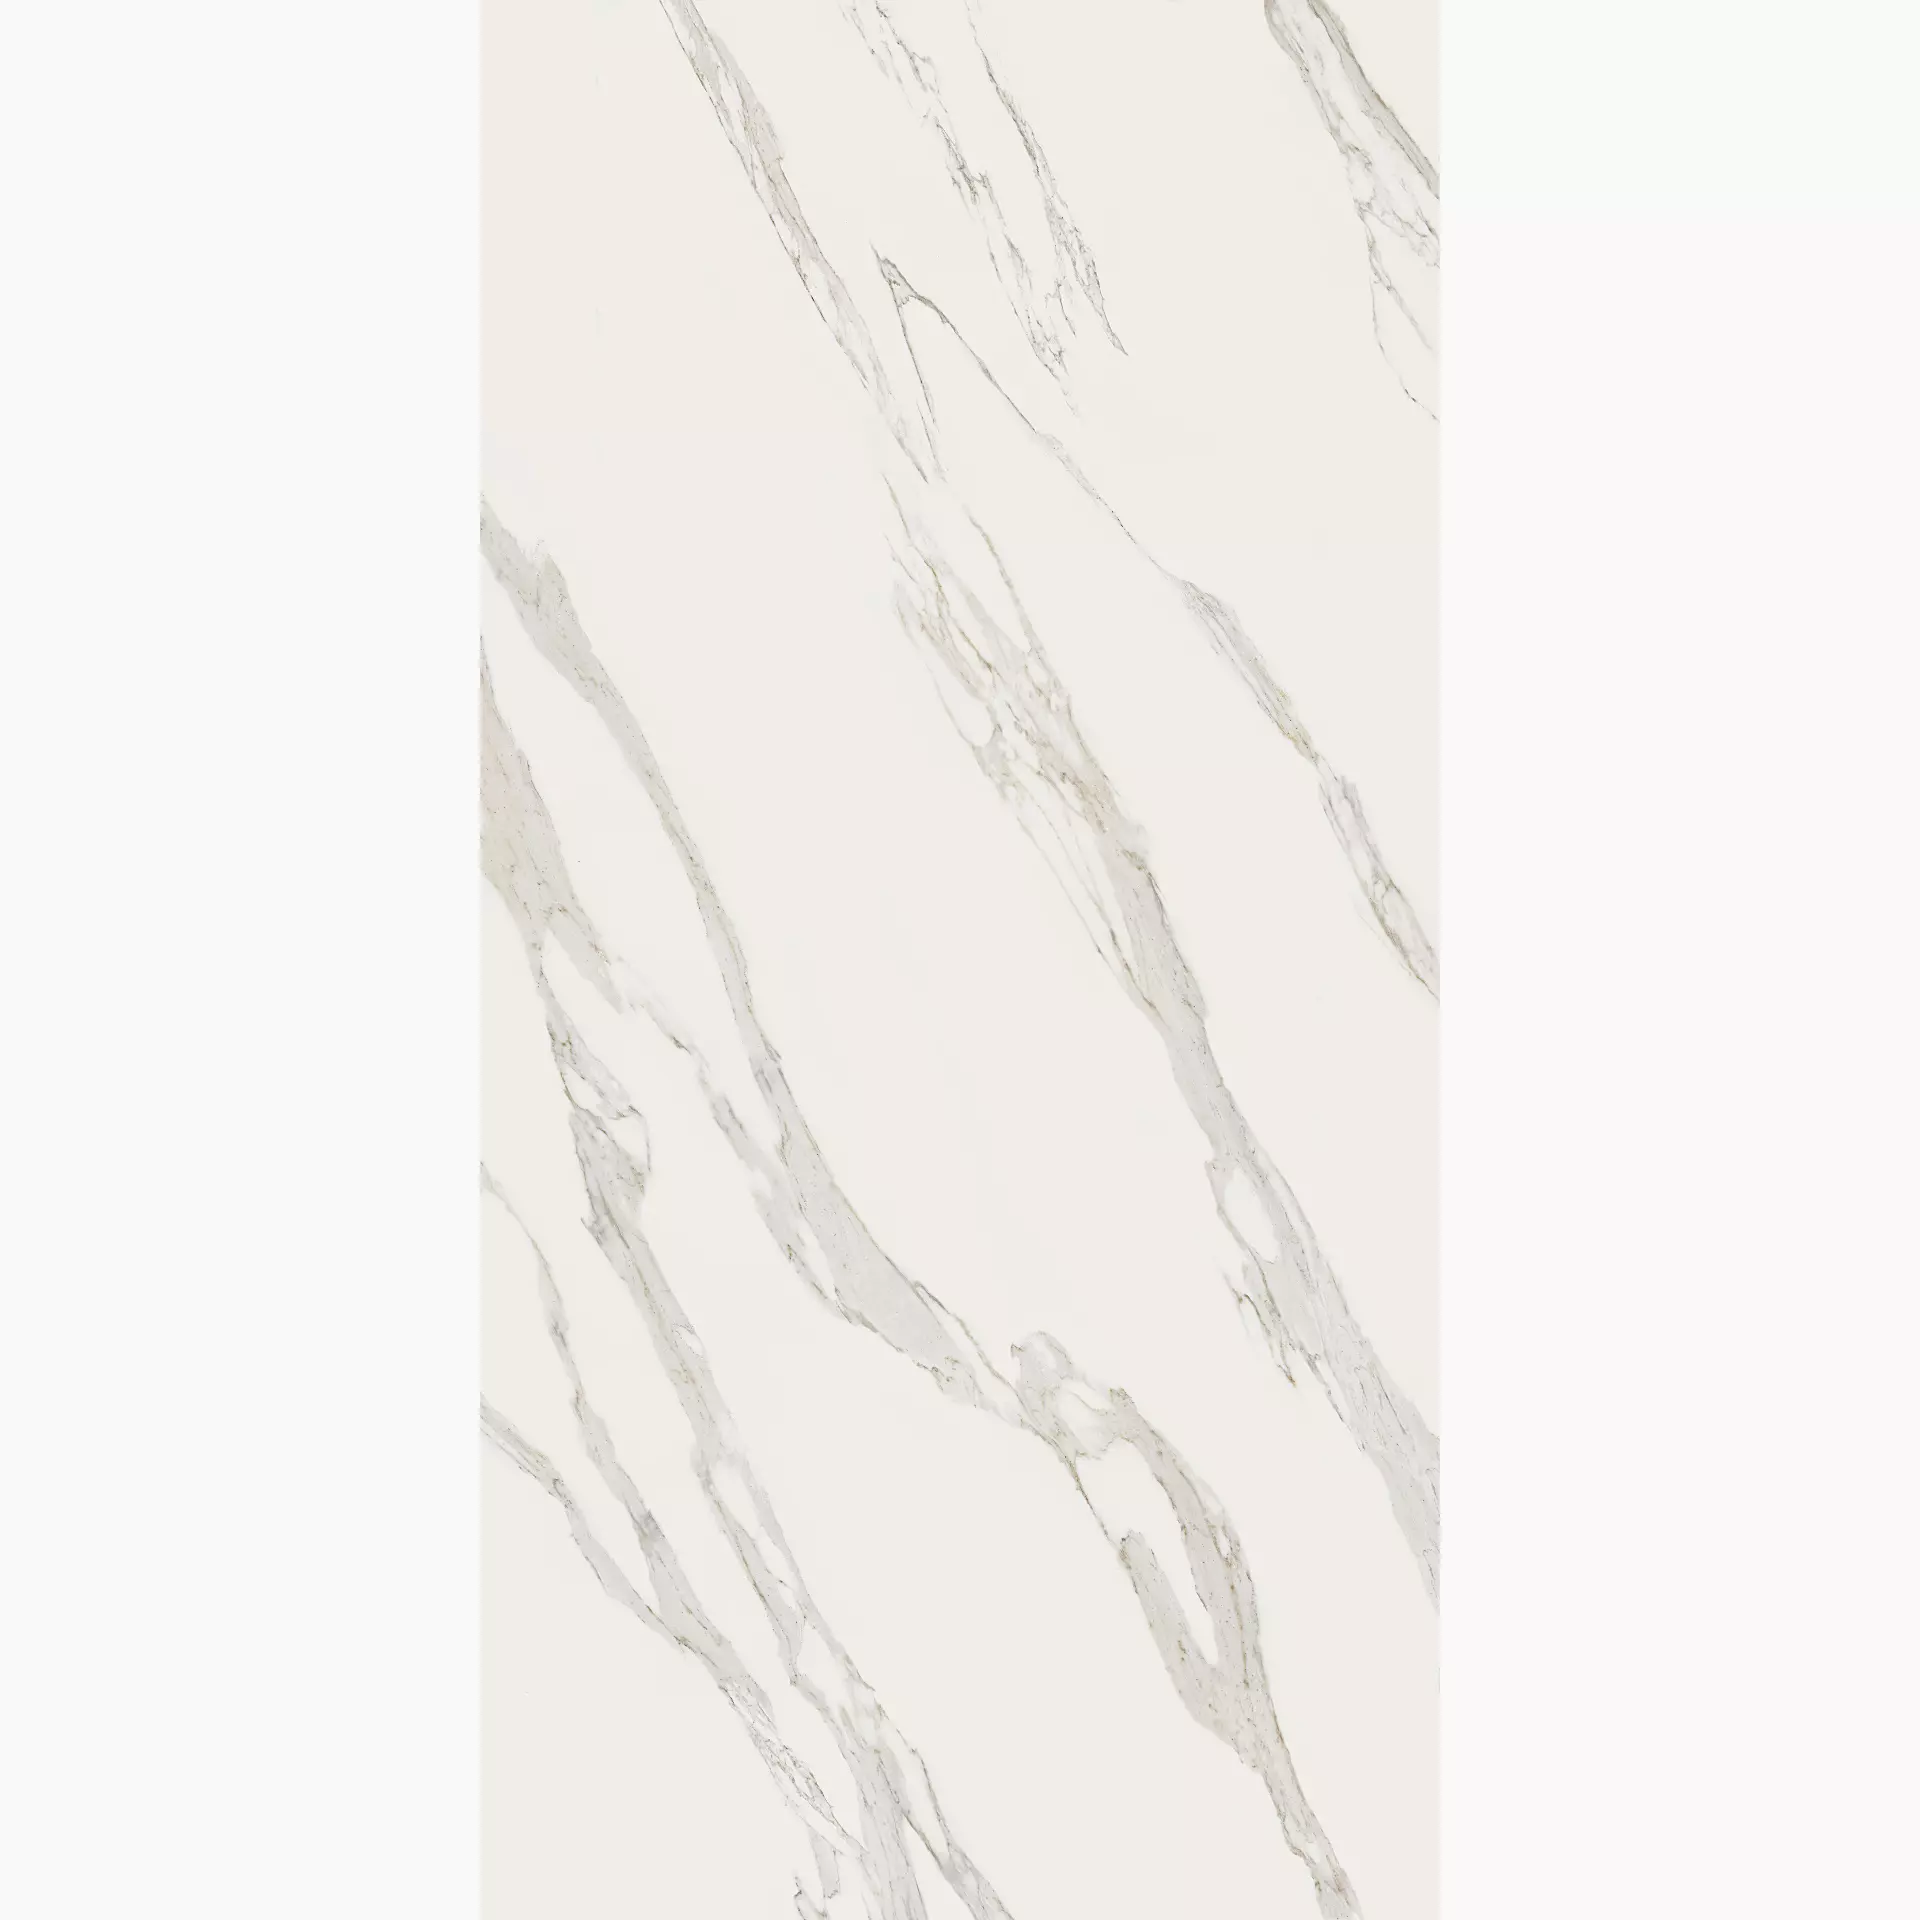 Mirage Jewels Jw 02 Calacatta Reale Lucido SI90 120x240cm rectified 9mm